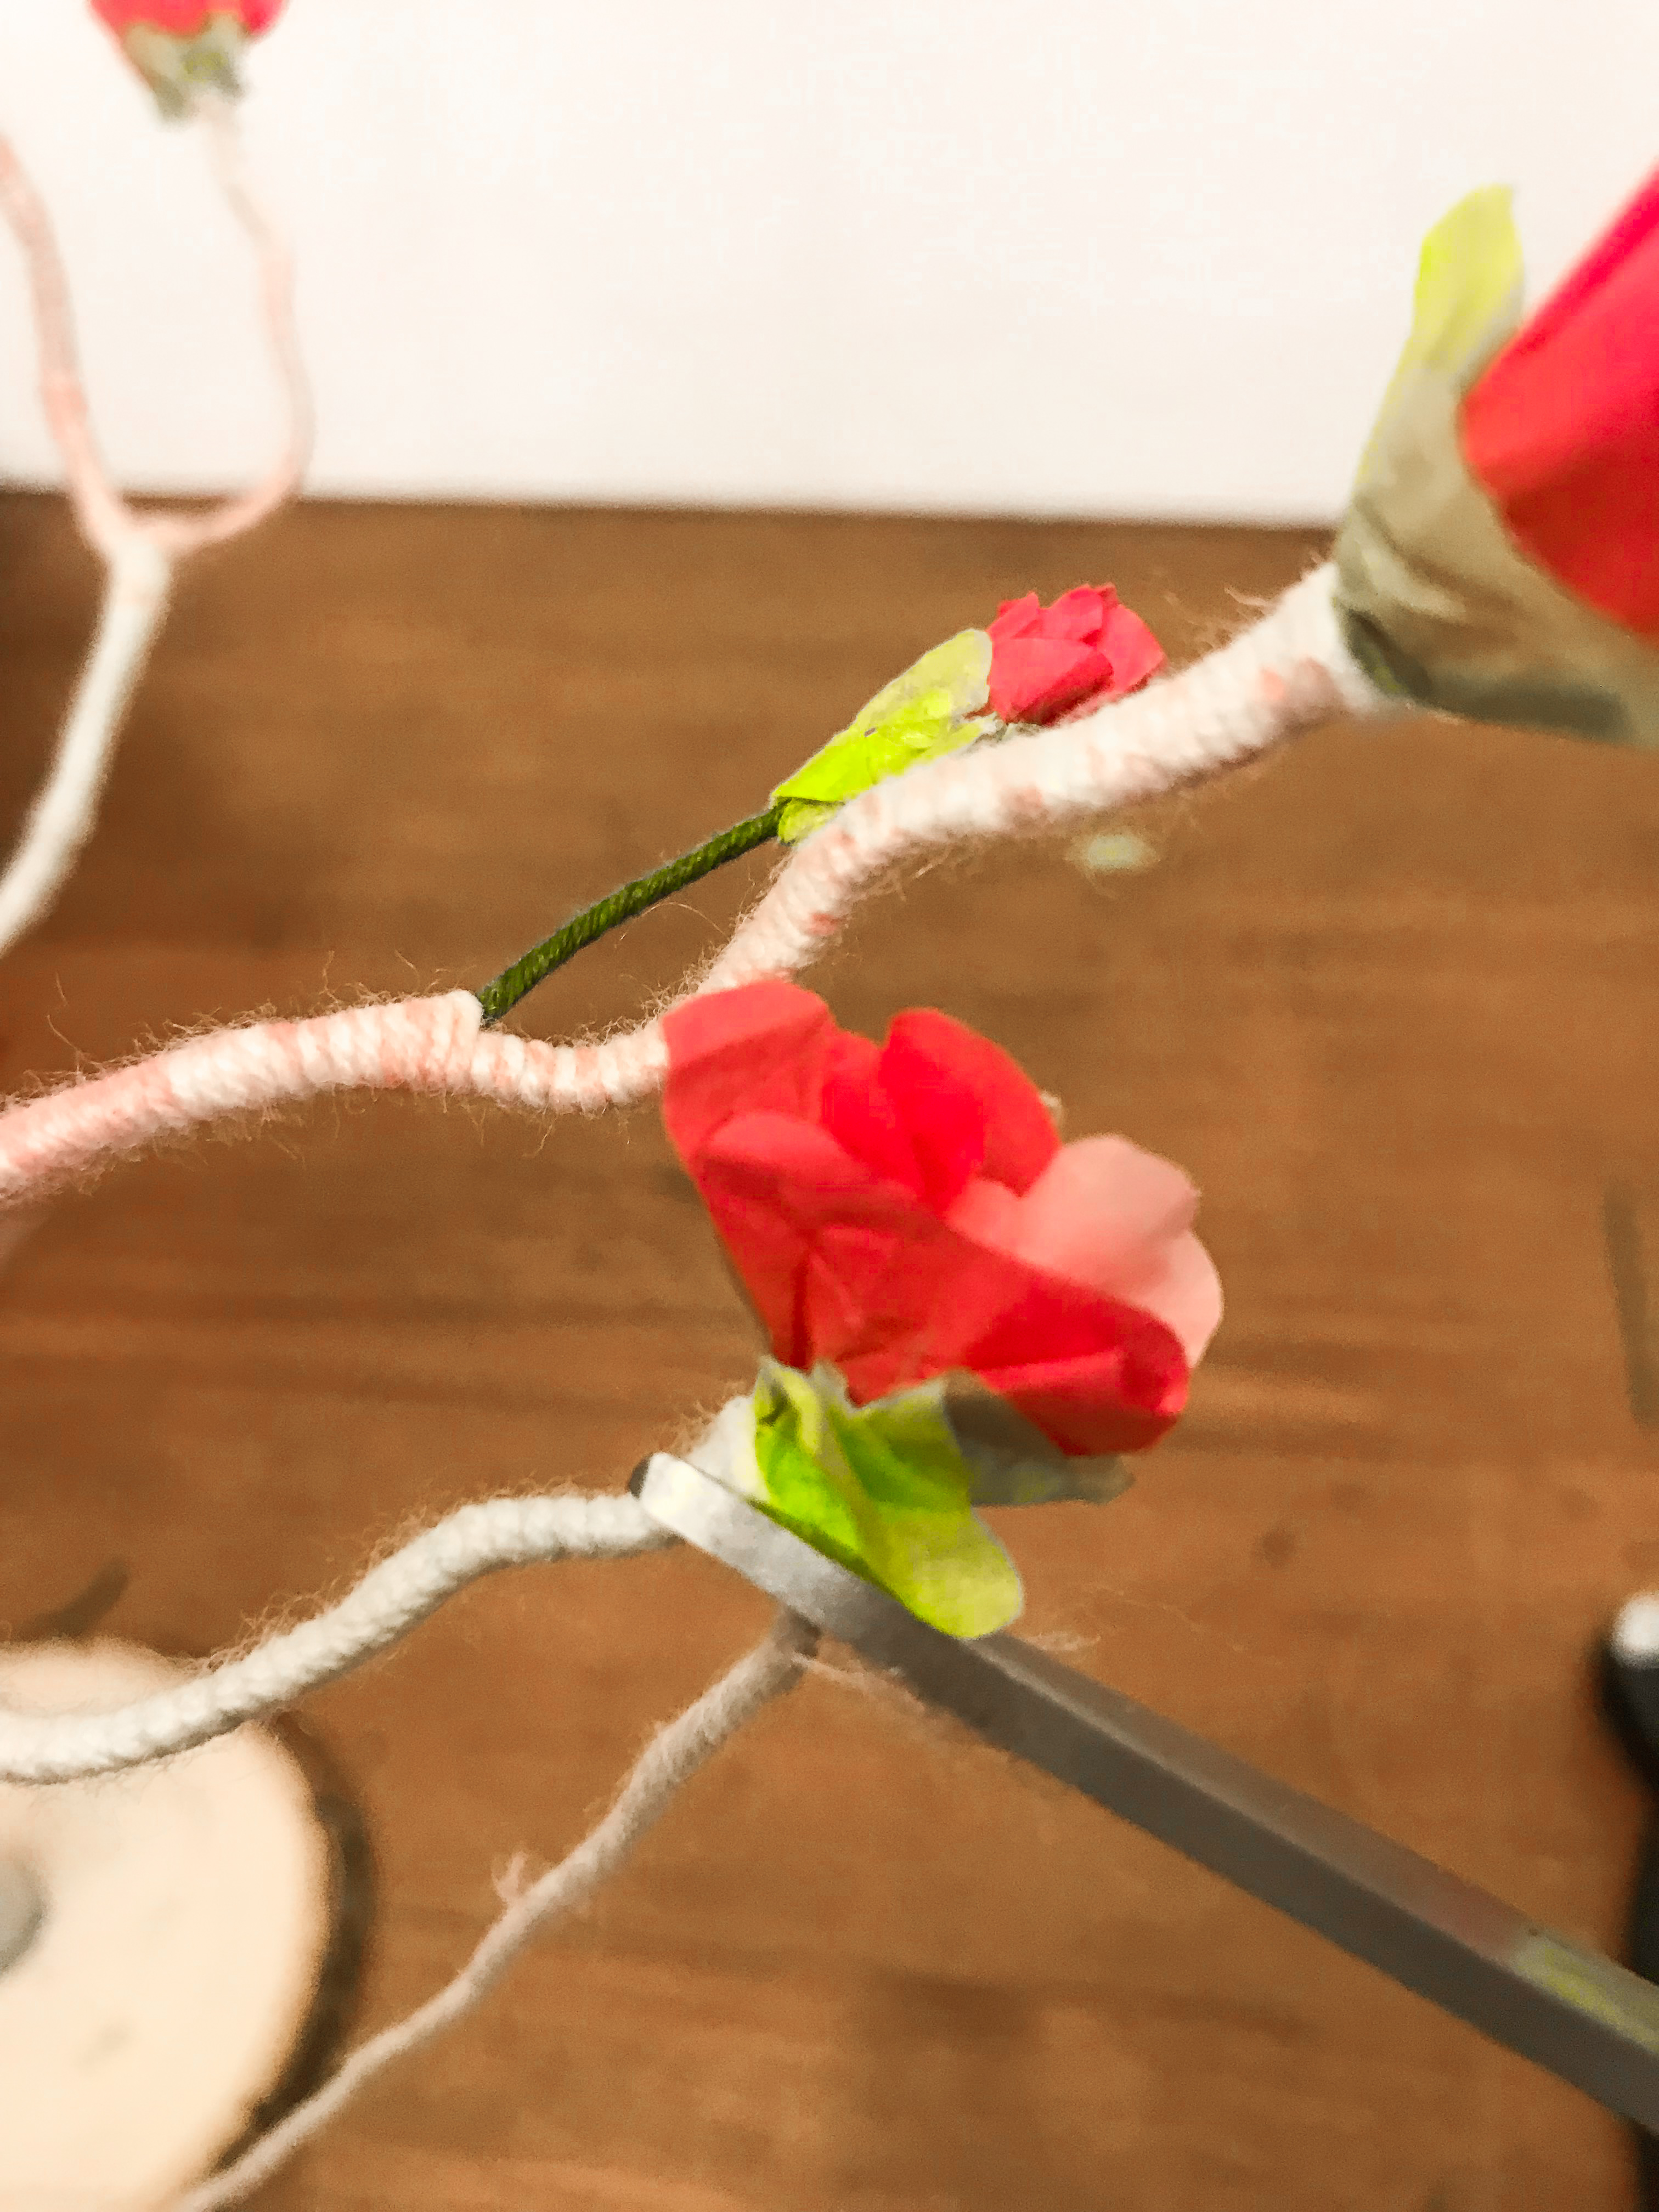 Scissors cutting yarn at the overlap point with tissue paper flowers. 